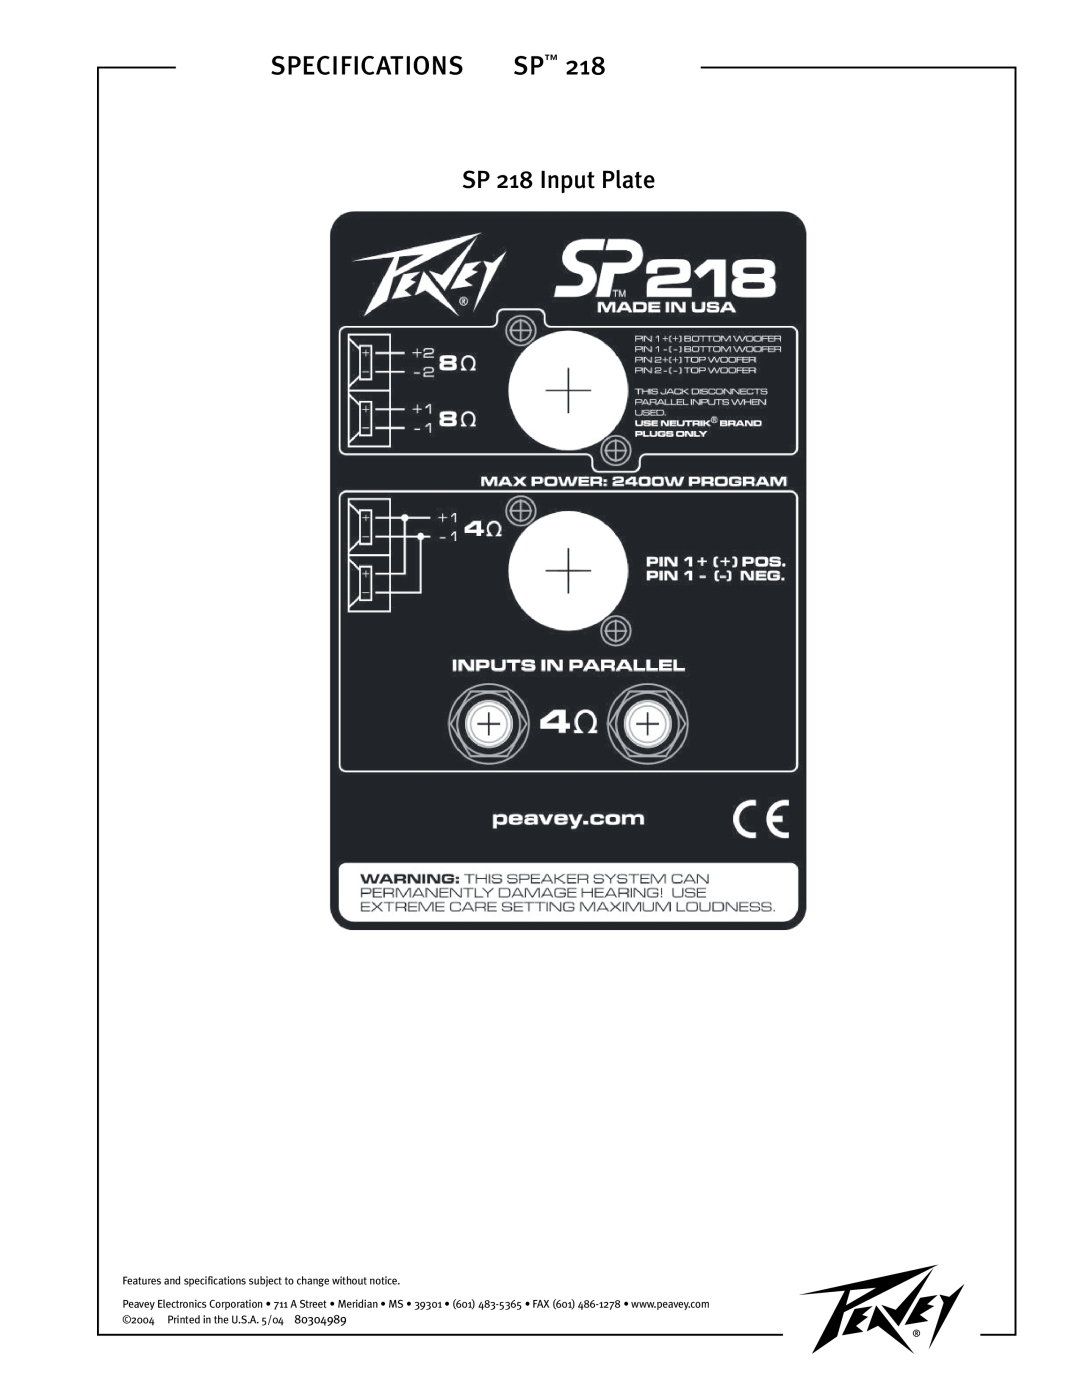 Peavey dimensions Specifications, SP 218 Input Plate, Features and specifications subject to change without notice 